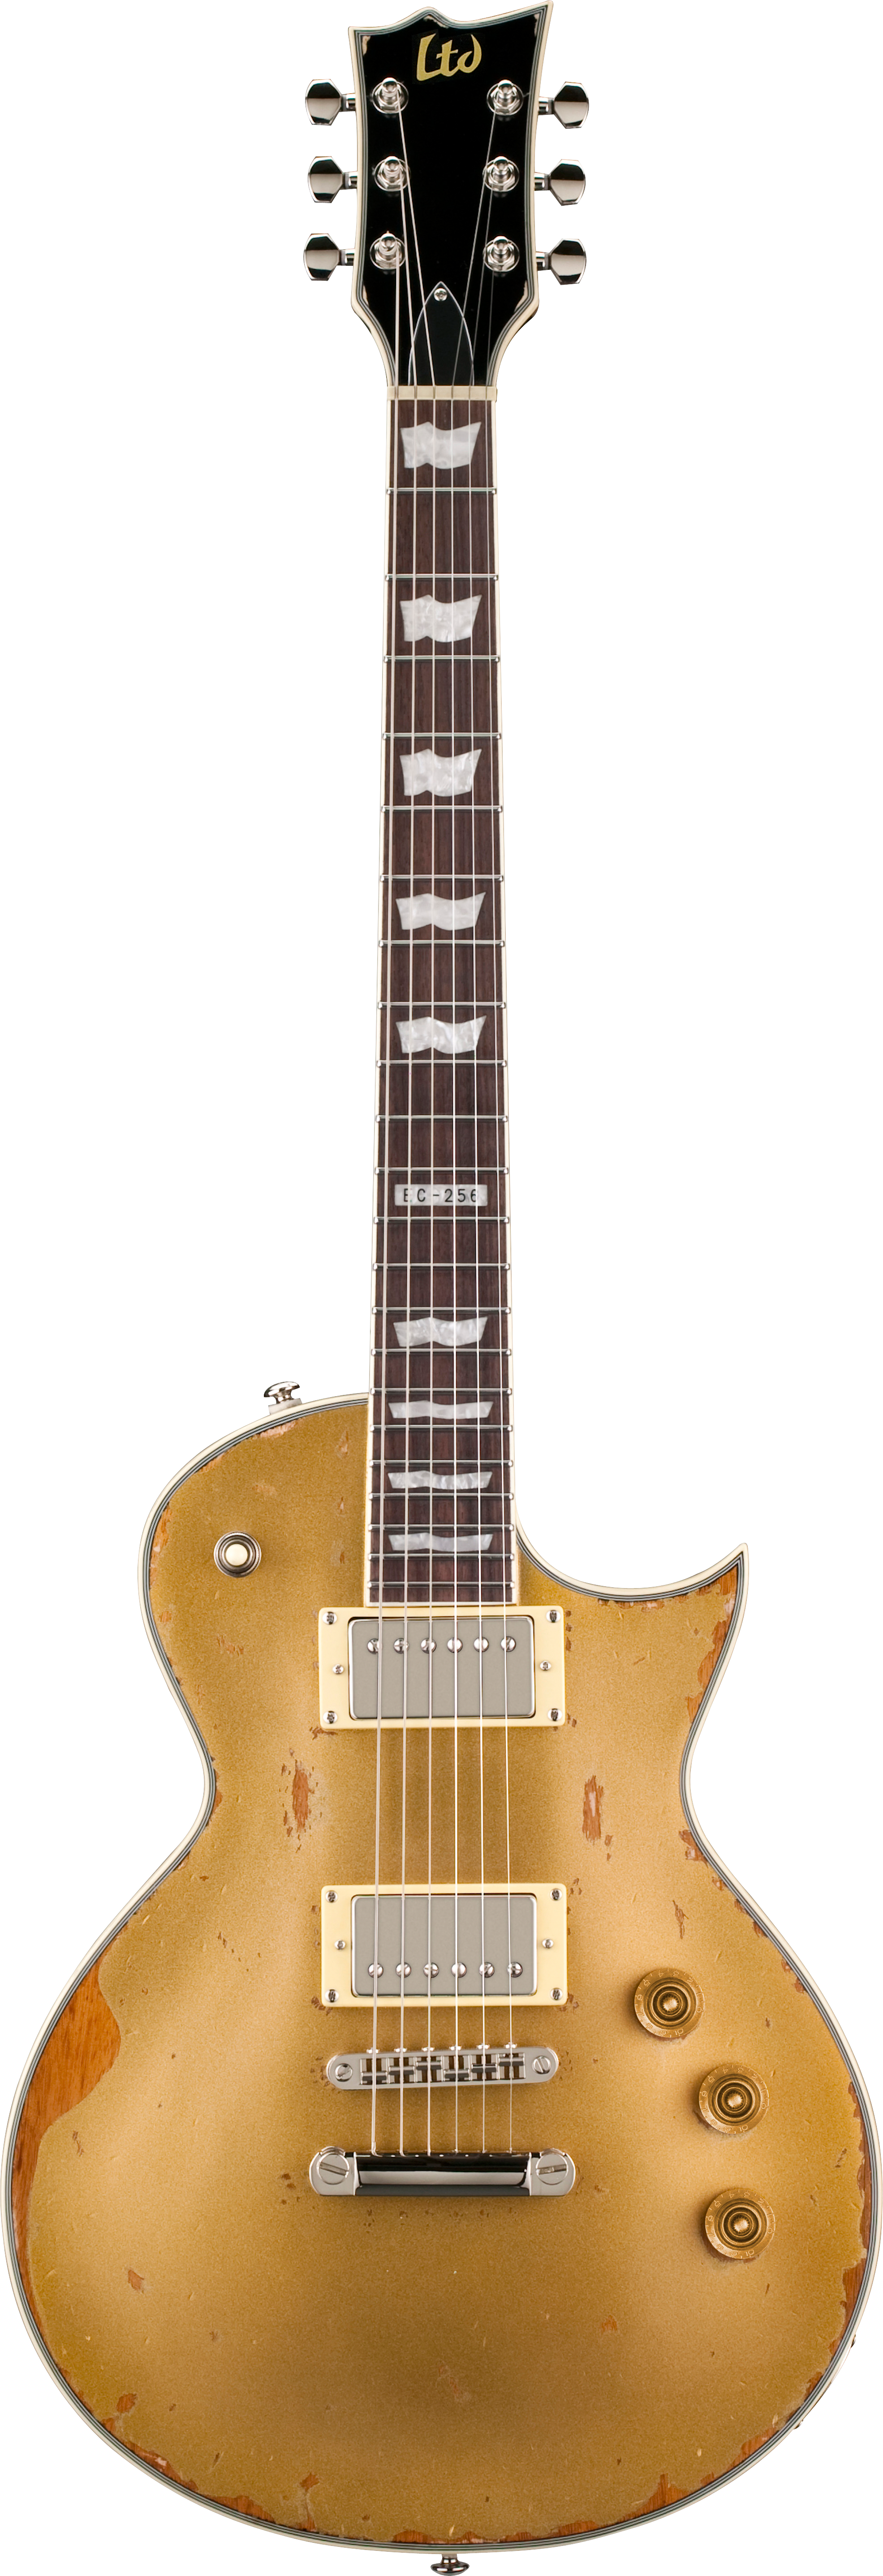 Guitar Golden Acoustic Free HD Image PNG Image